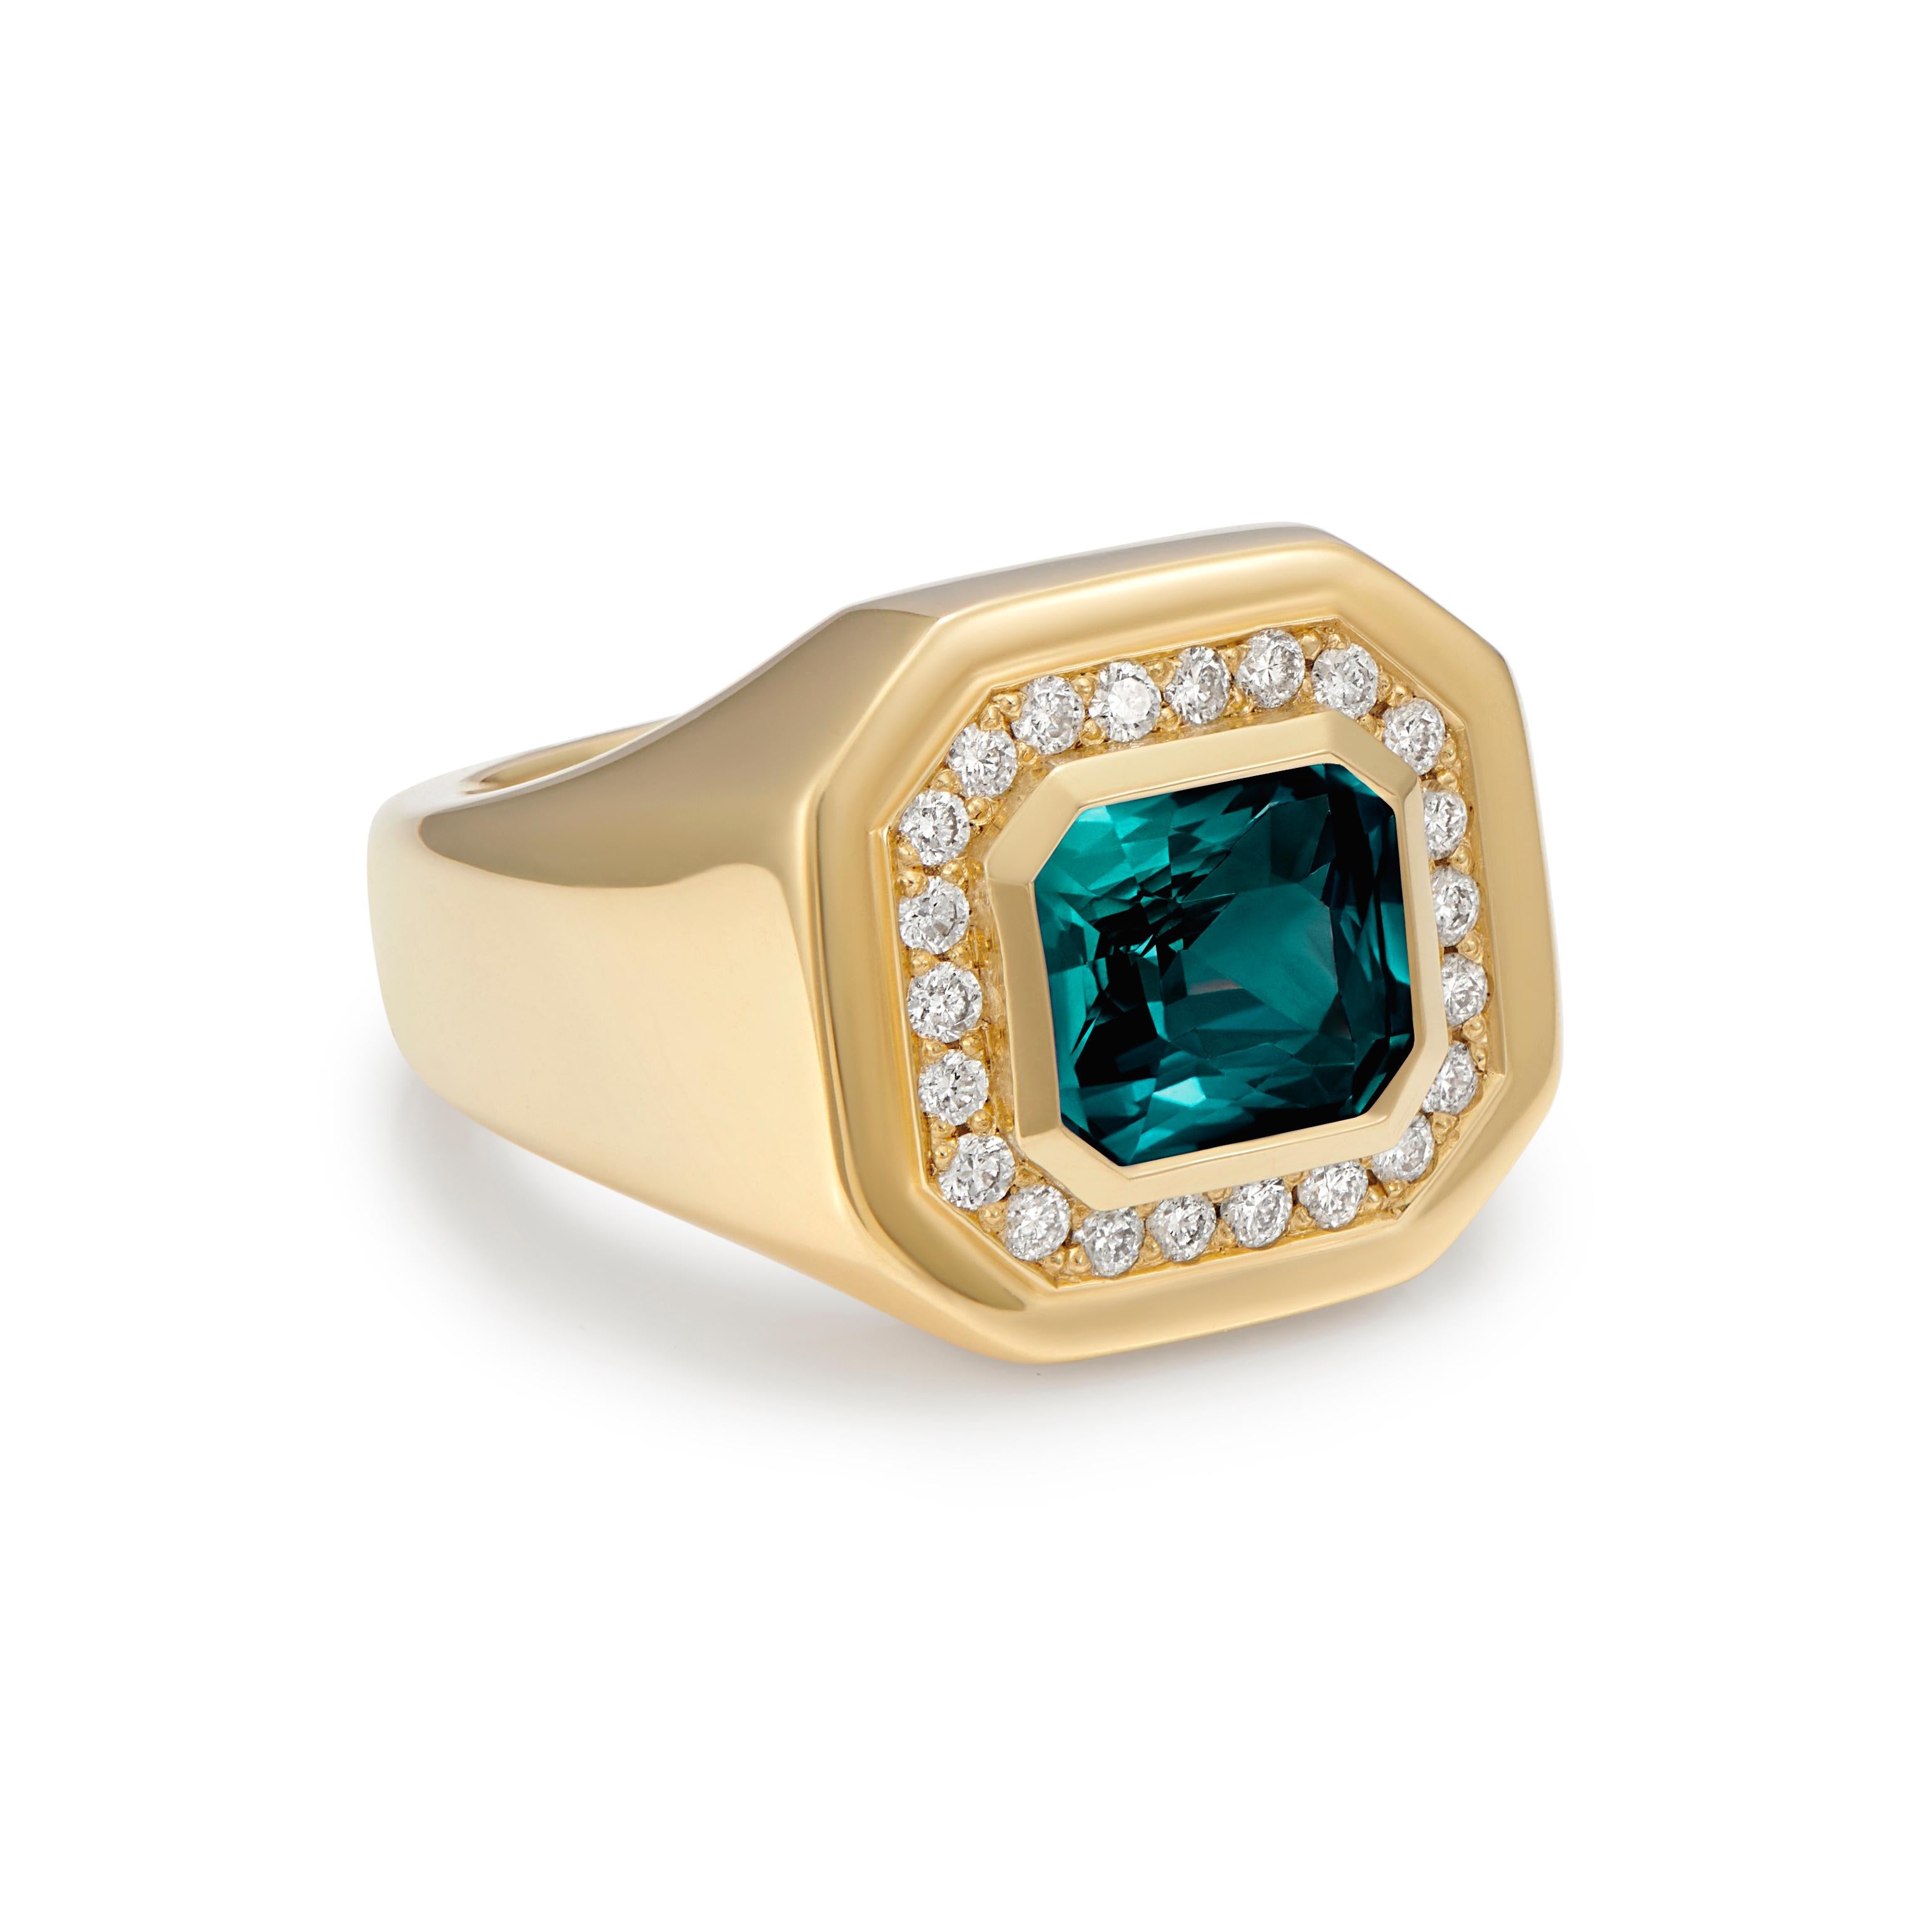 This incredible forest green tourmaline and diamond, 18kt yellow gold hand made ring is a one of a kind statement ring.

2.98ct Octagon Tourmaline, 0.35ct Diamonds, 18kt Yellow Gold 

This collection distils the beauty and glamour of 1920s Berlin